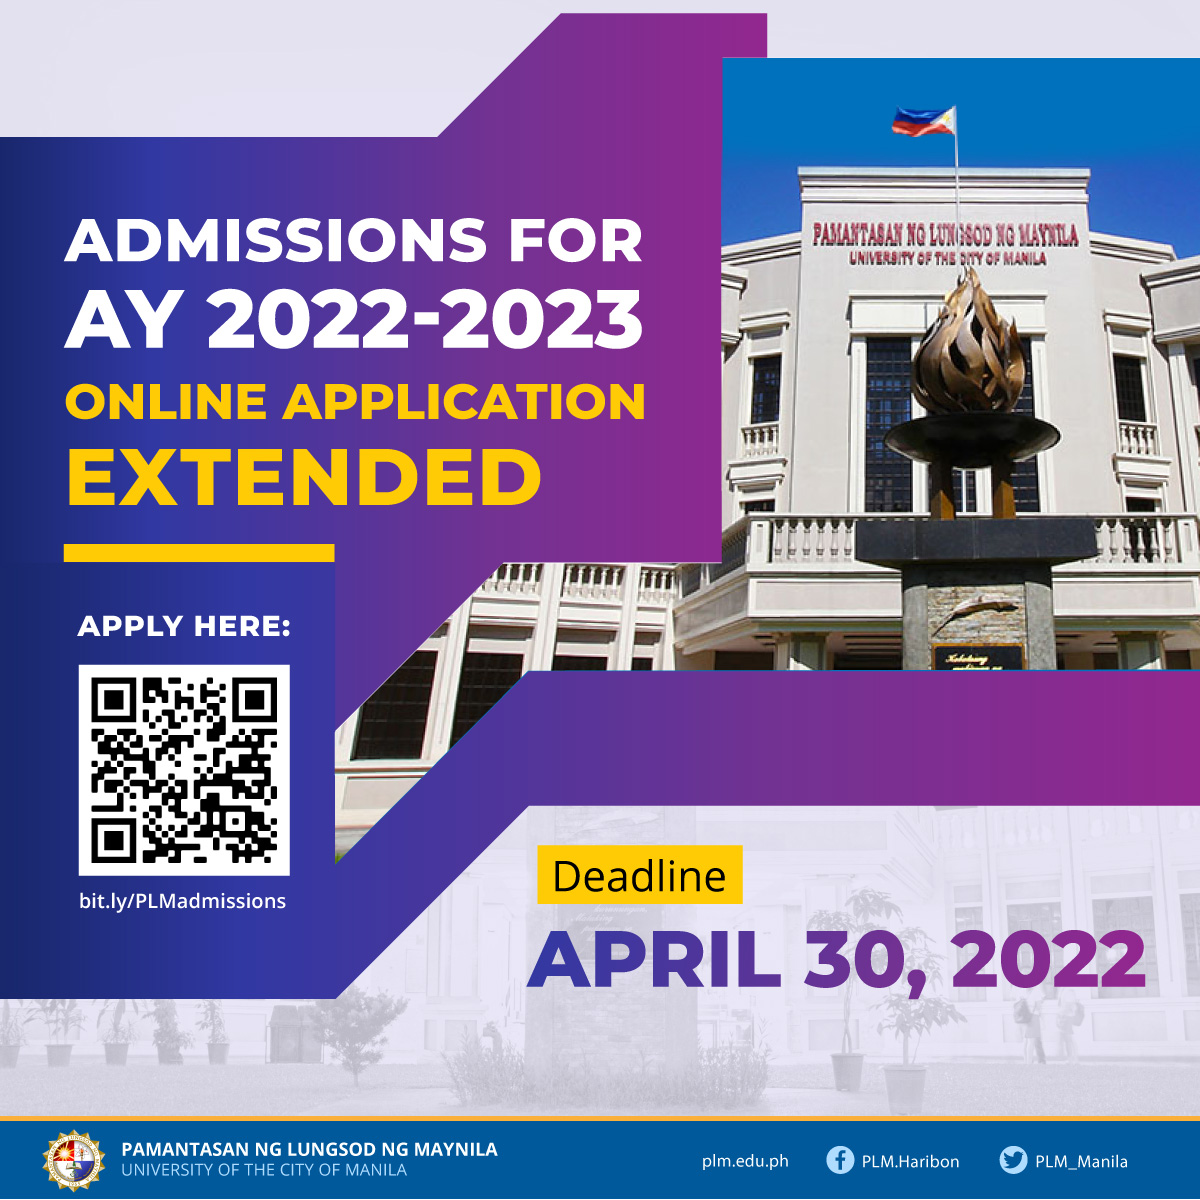 Application for AY 2022-2023 admissions extended until April 30, 2022